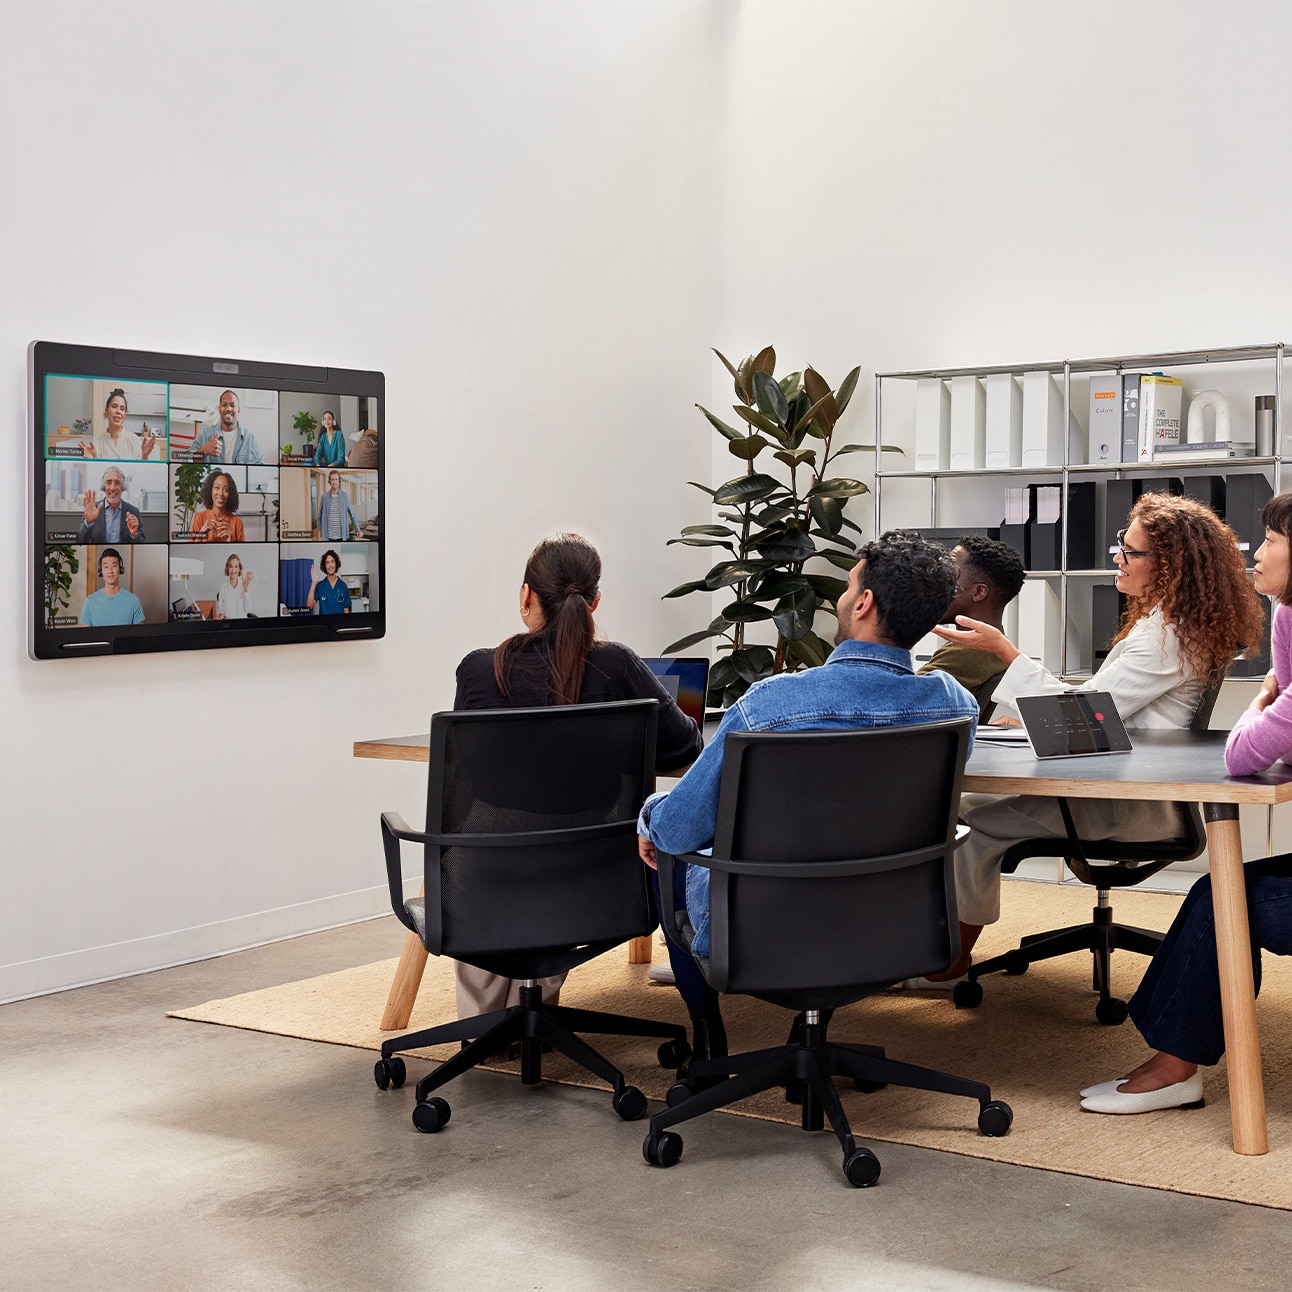 Five people collaborating in a small meeting room. Cisco Board Pro mounted on the wall showing remote participants in a grid view and the tabletop Cisco Room Navigator room controller.